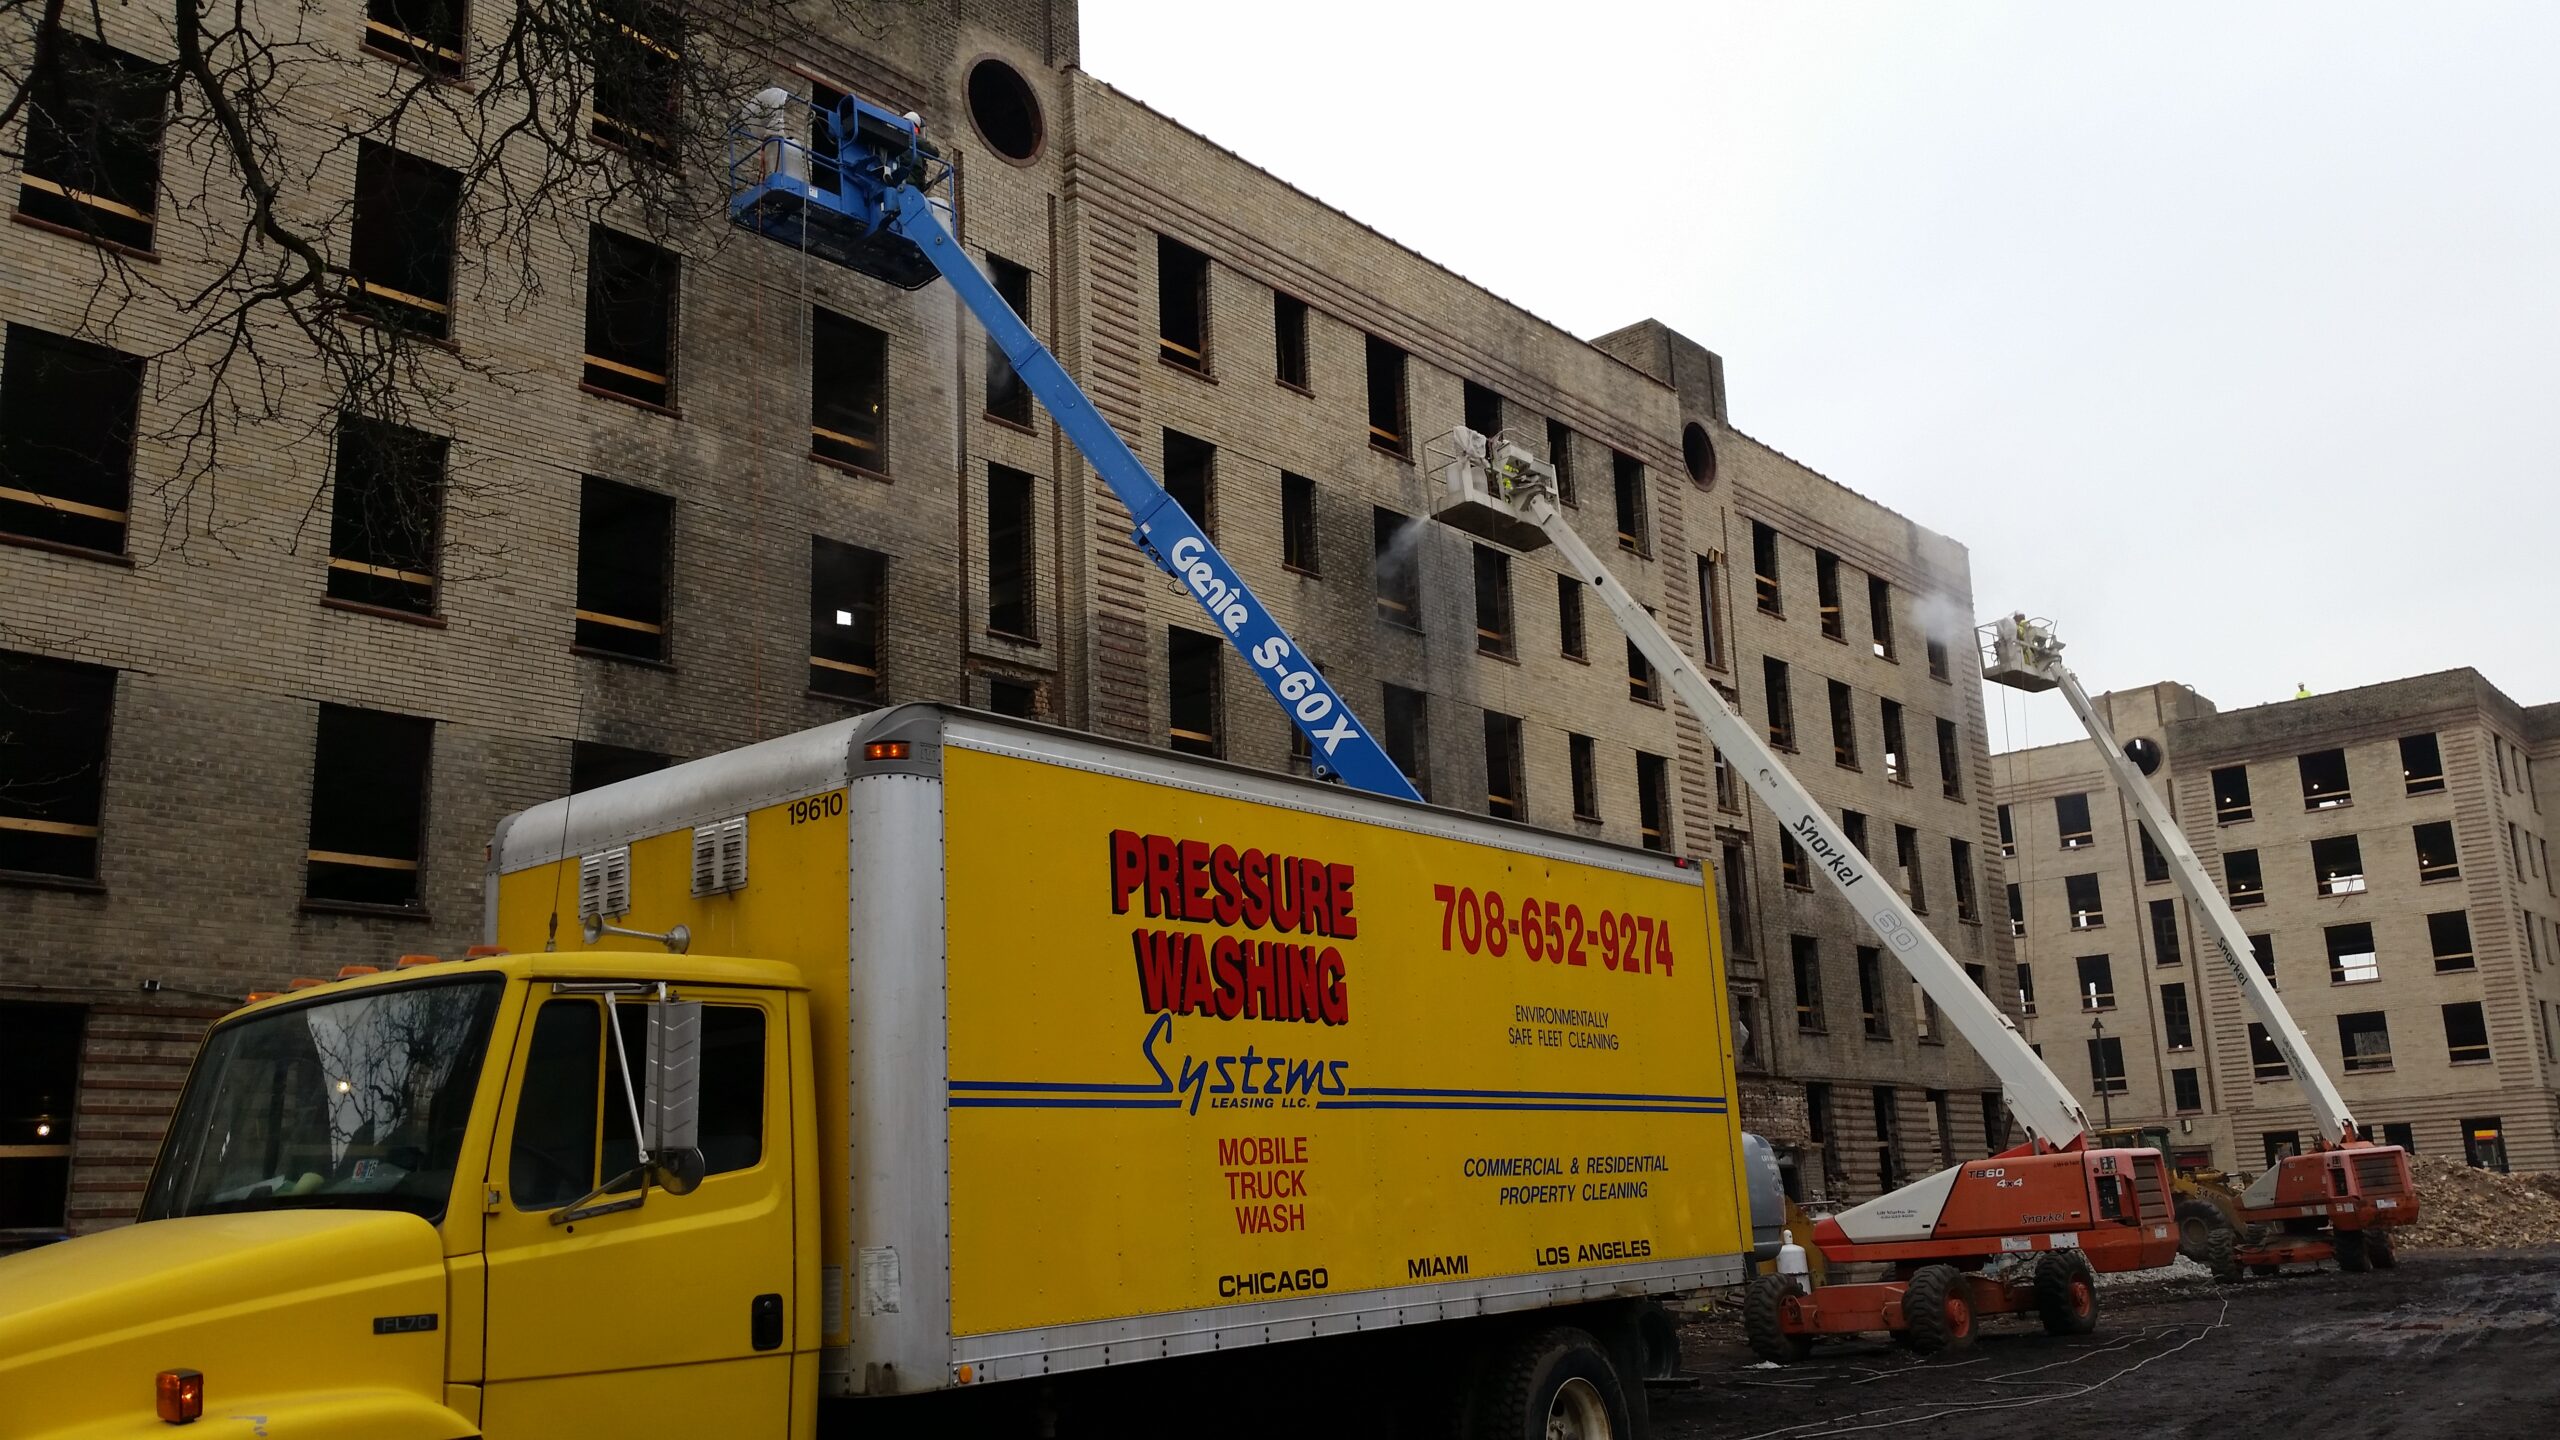 PWS owns a fleet of 40 trucks that are completely self-contained, meaning they can wash a building, pick up the wastewater, treat it on the truck with a sophisticated filtration system, and reuse that water to keep washing the building. Photo courtesy Pressure Washing Systems